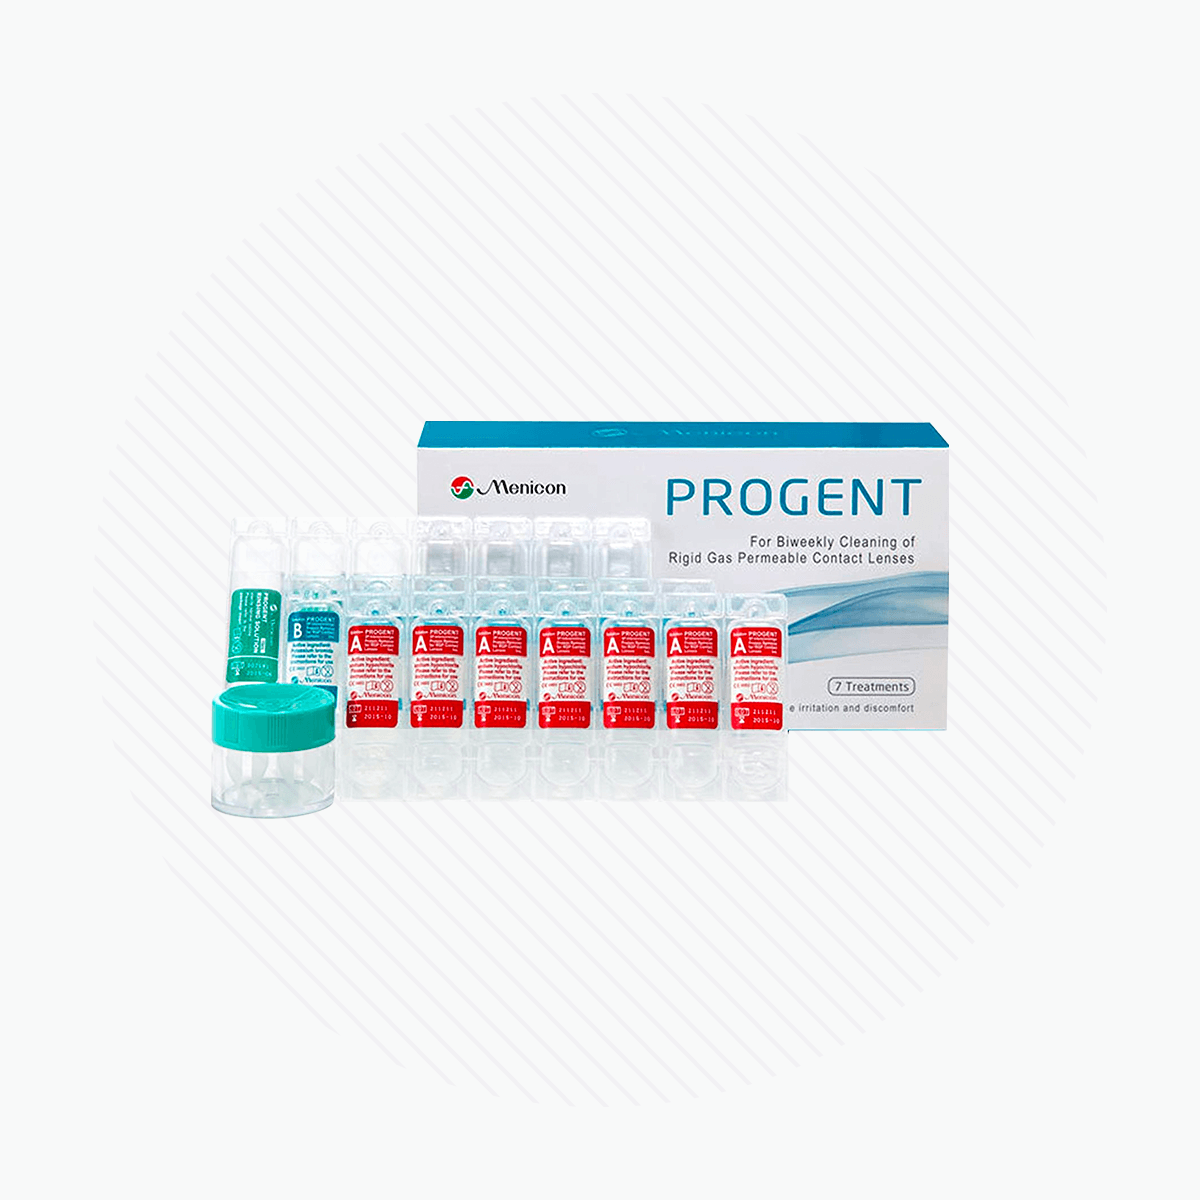 Menicon Progent Biweekly Contact Lens Cleaner - Removes Protein Deposits (7 Treatments) - DryEye Rescue Store